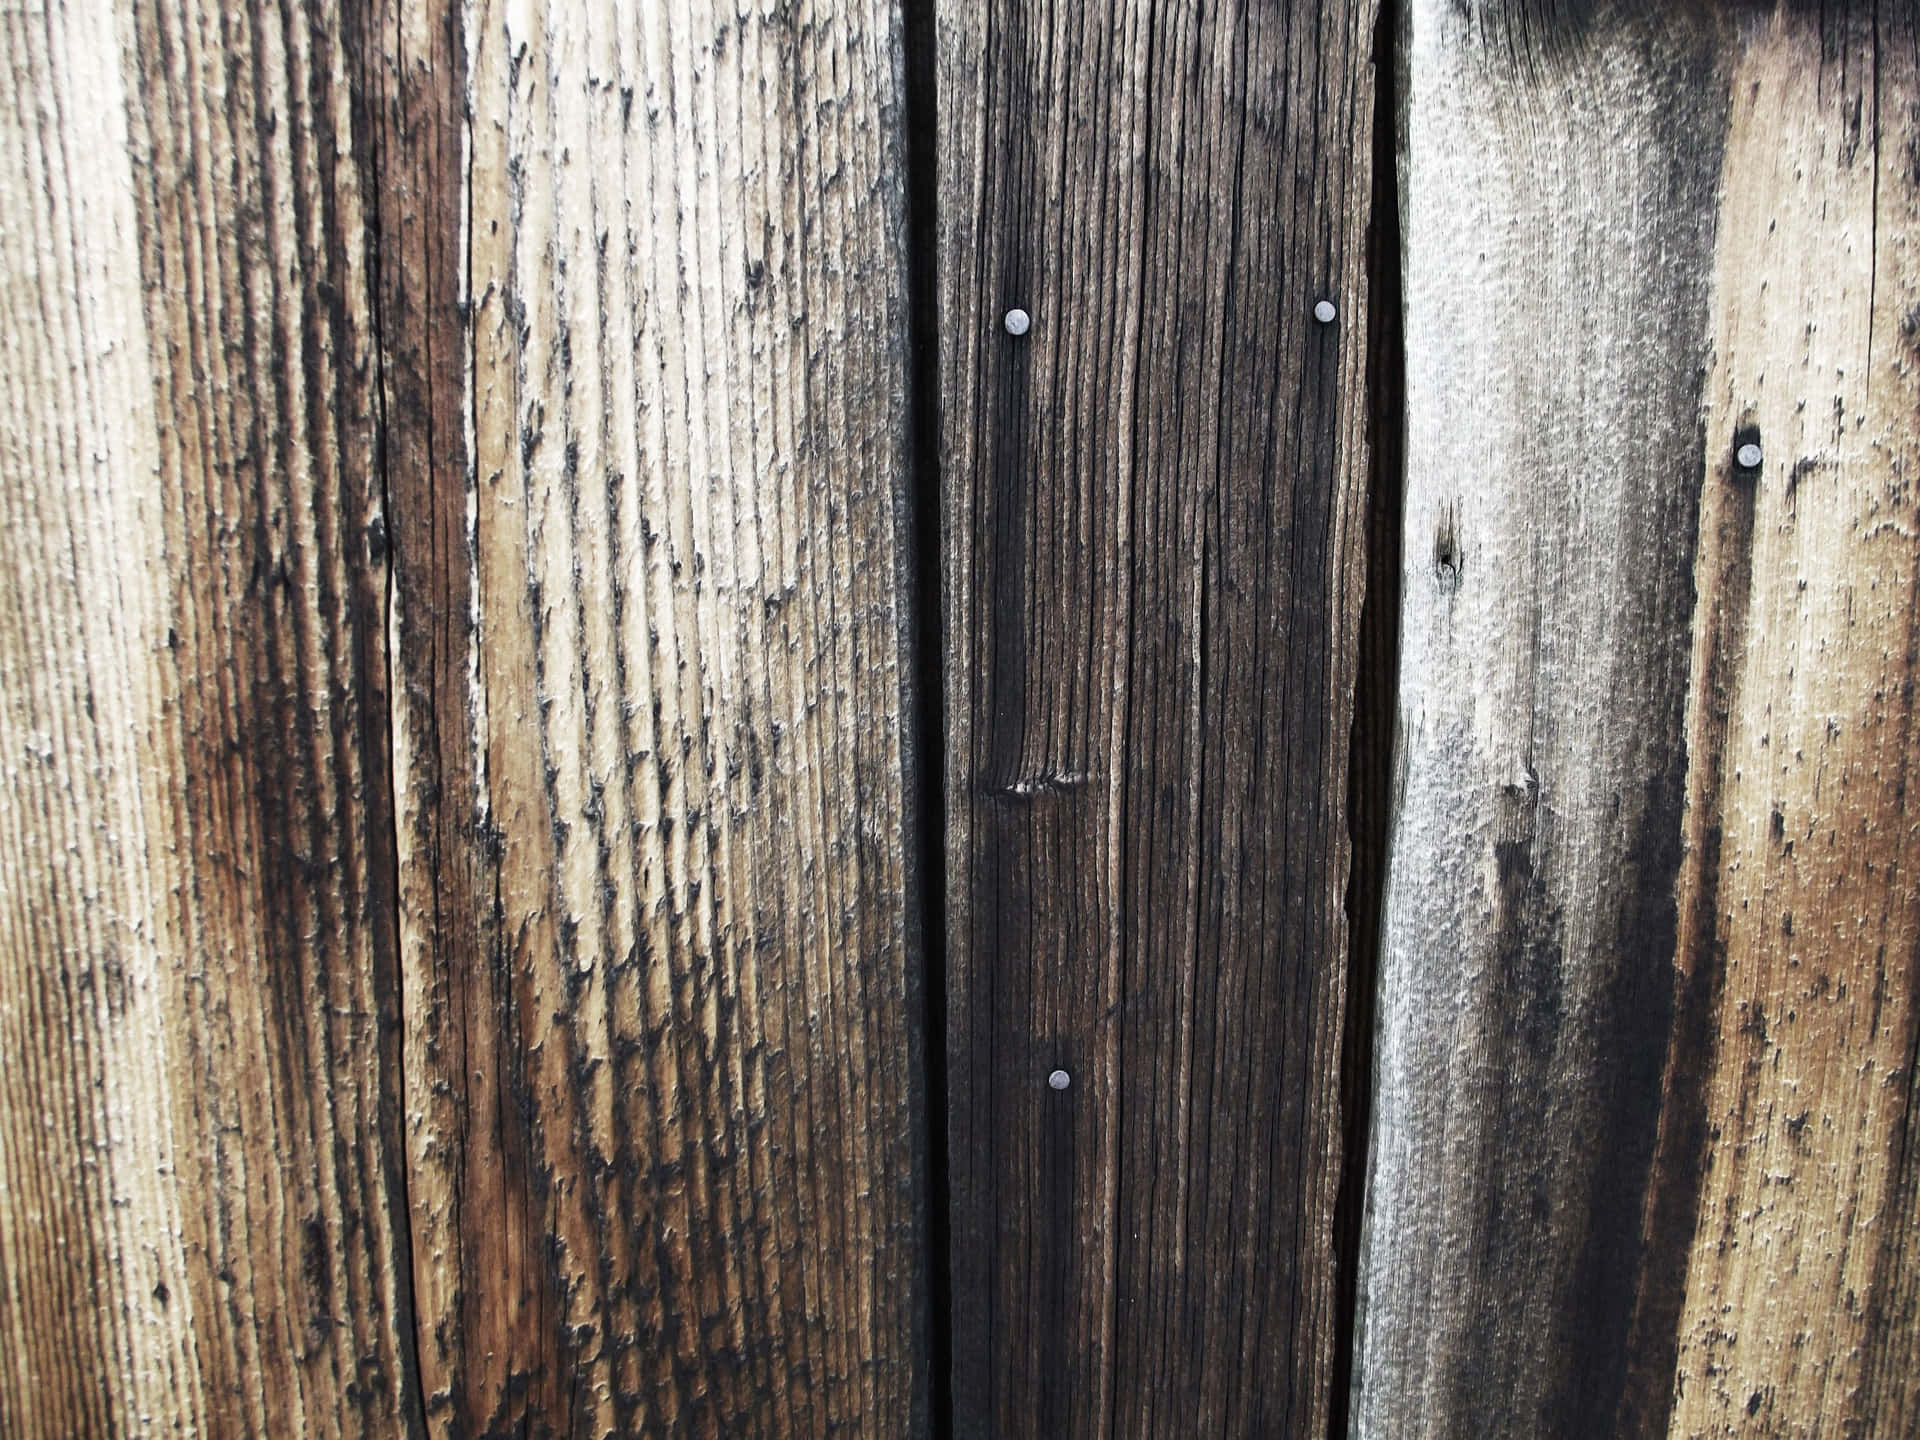 "Back to Nature: Close Up of a Weathered Barn Wood Wall" Wallpaper